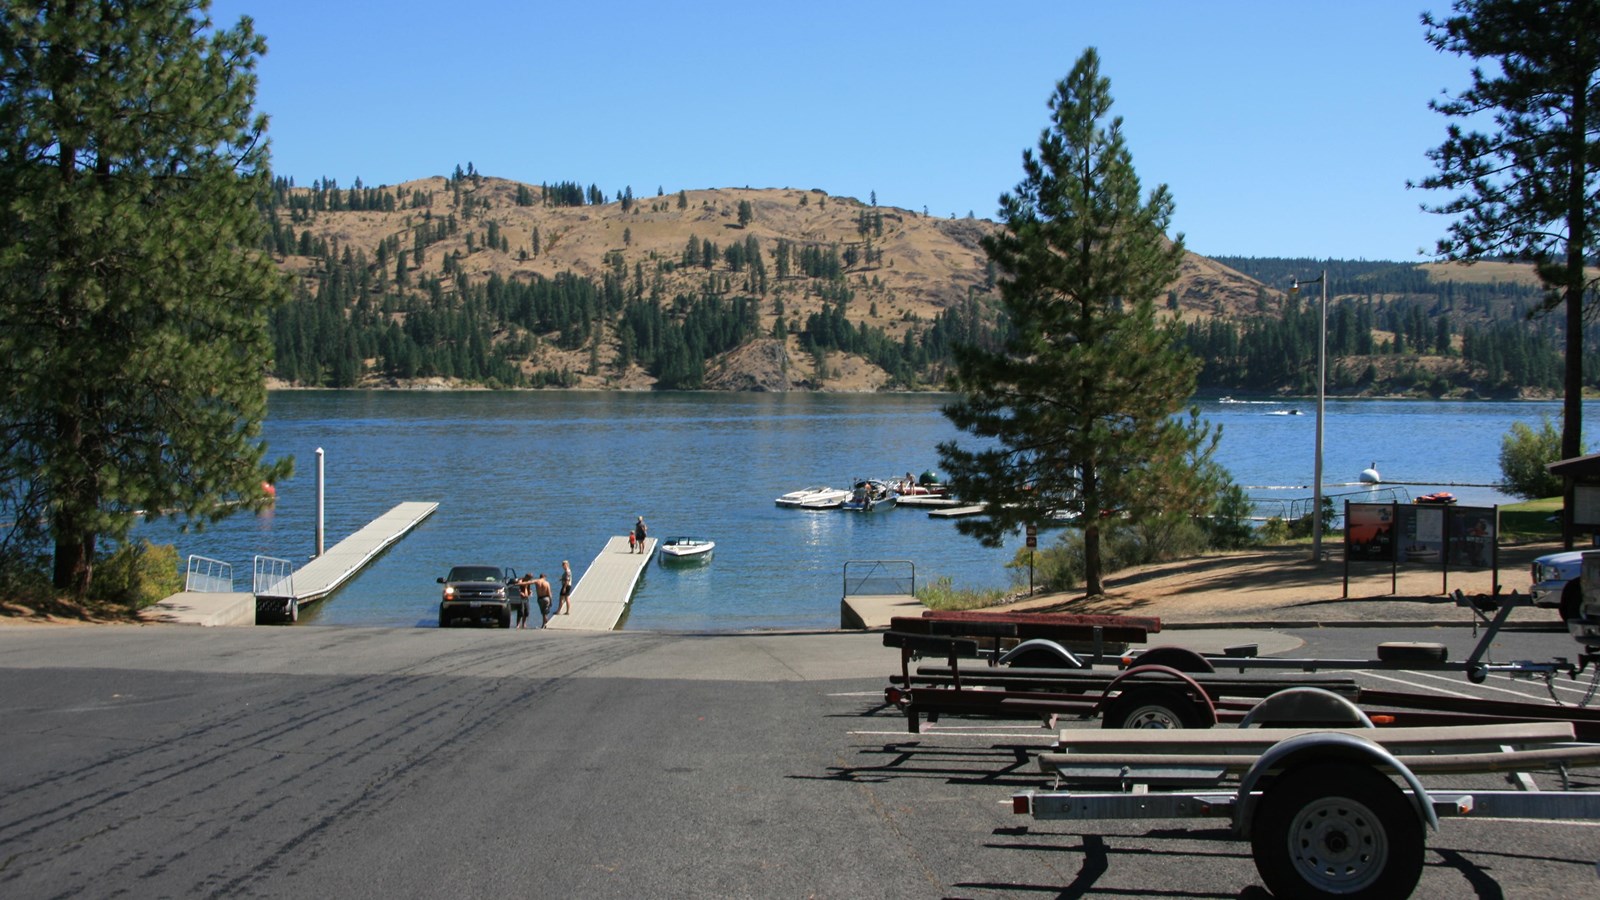 The paved launch at Porcupine bay has two docks and a beautiful view of the lake.